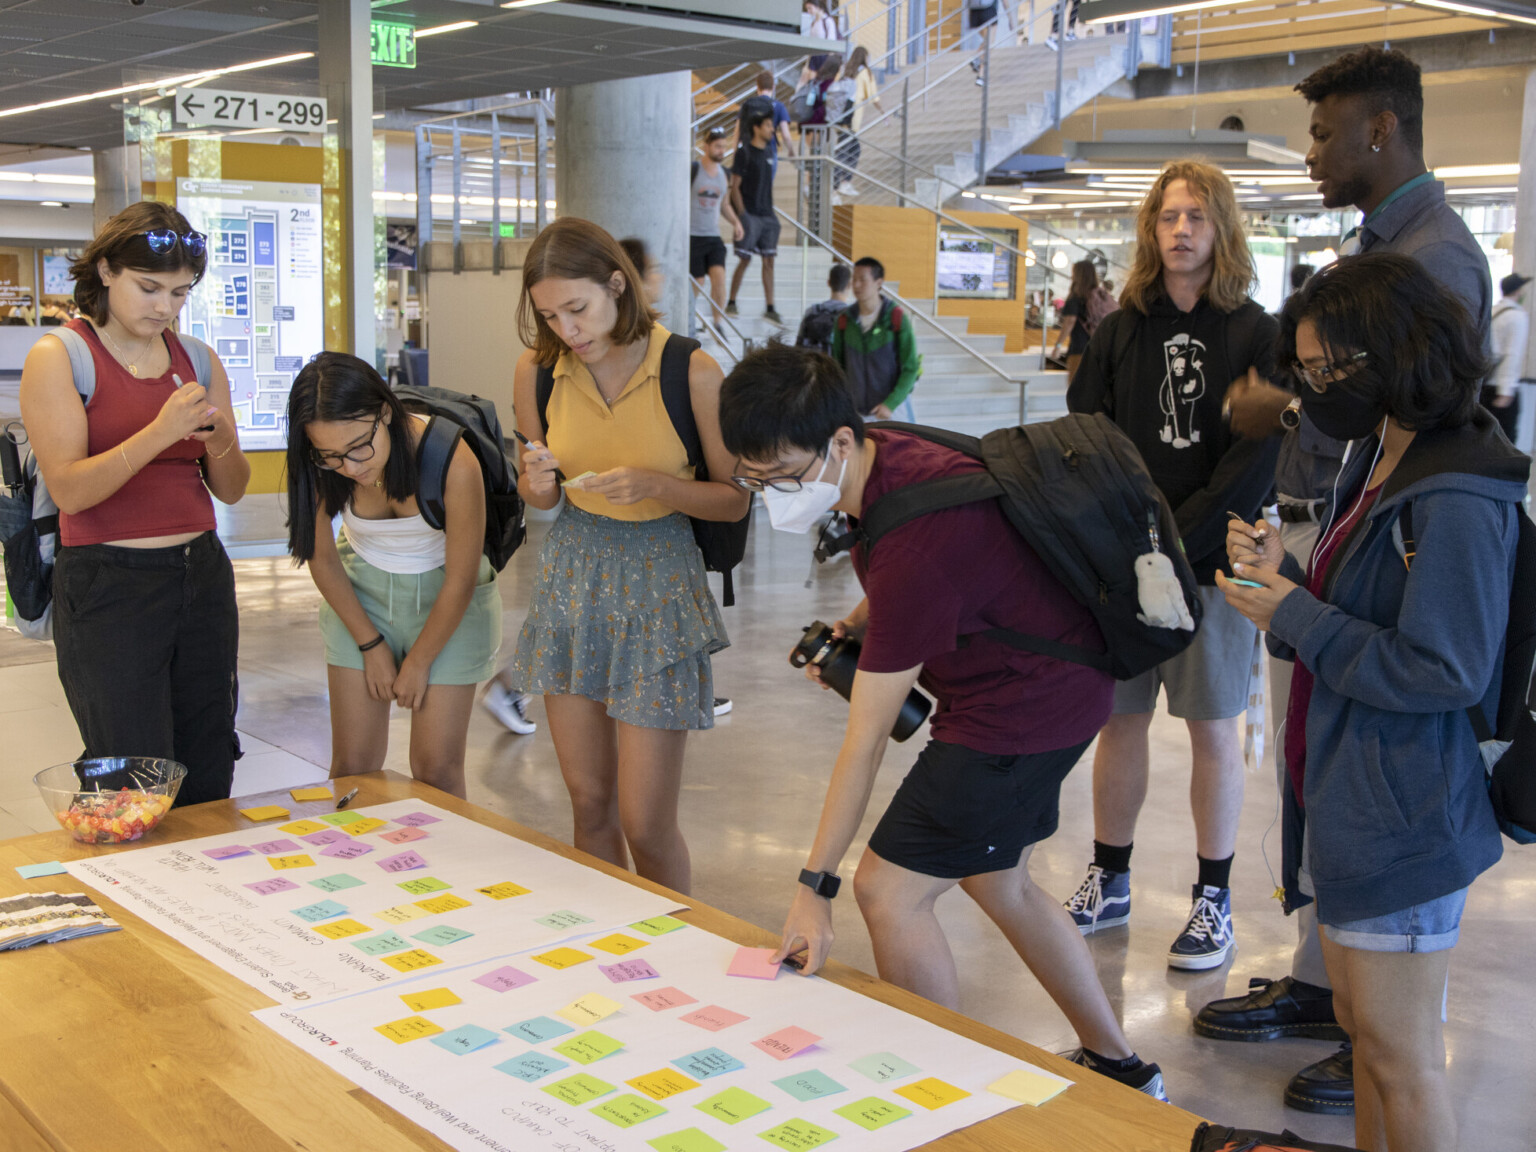 Students interacting in a common area placing colorful sticky notes on white paper on a wooden table